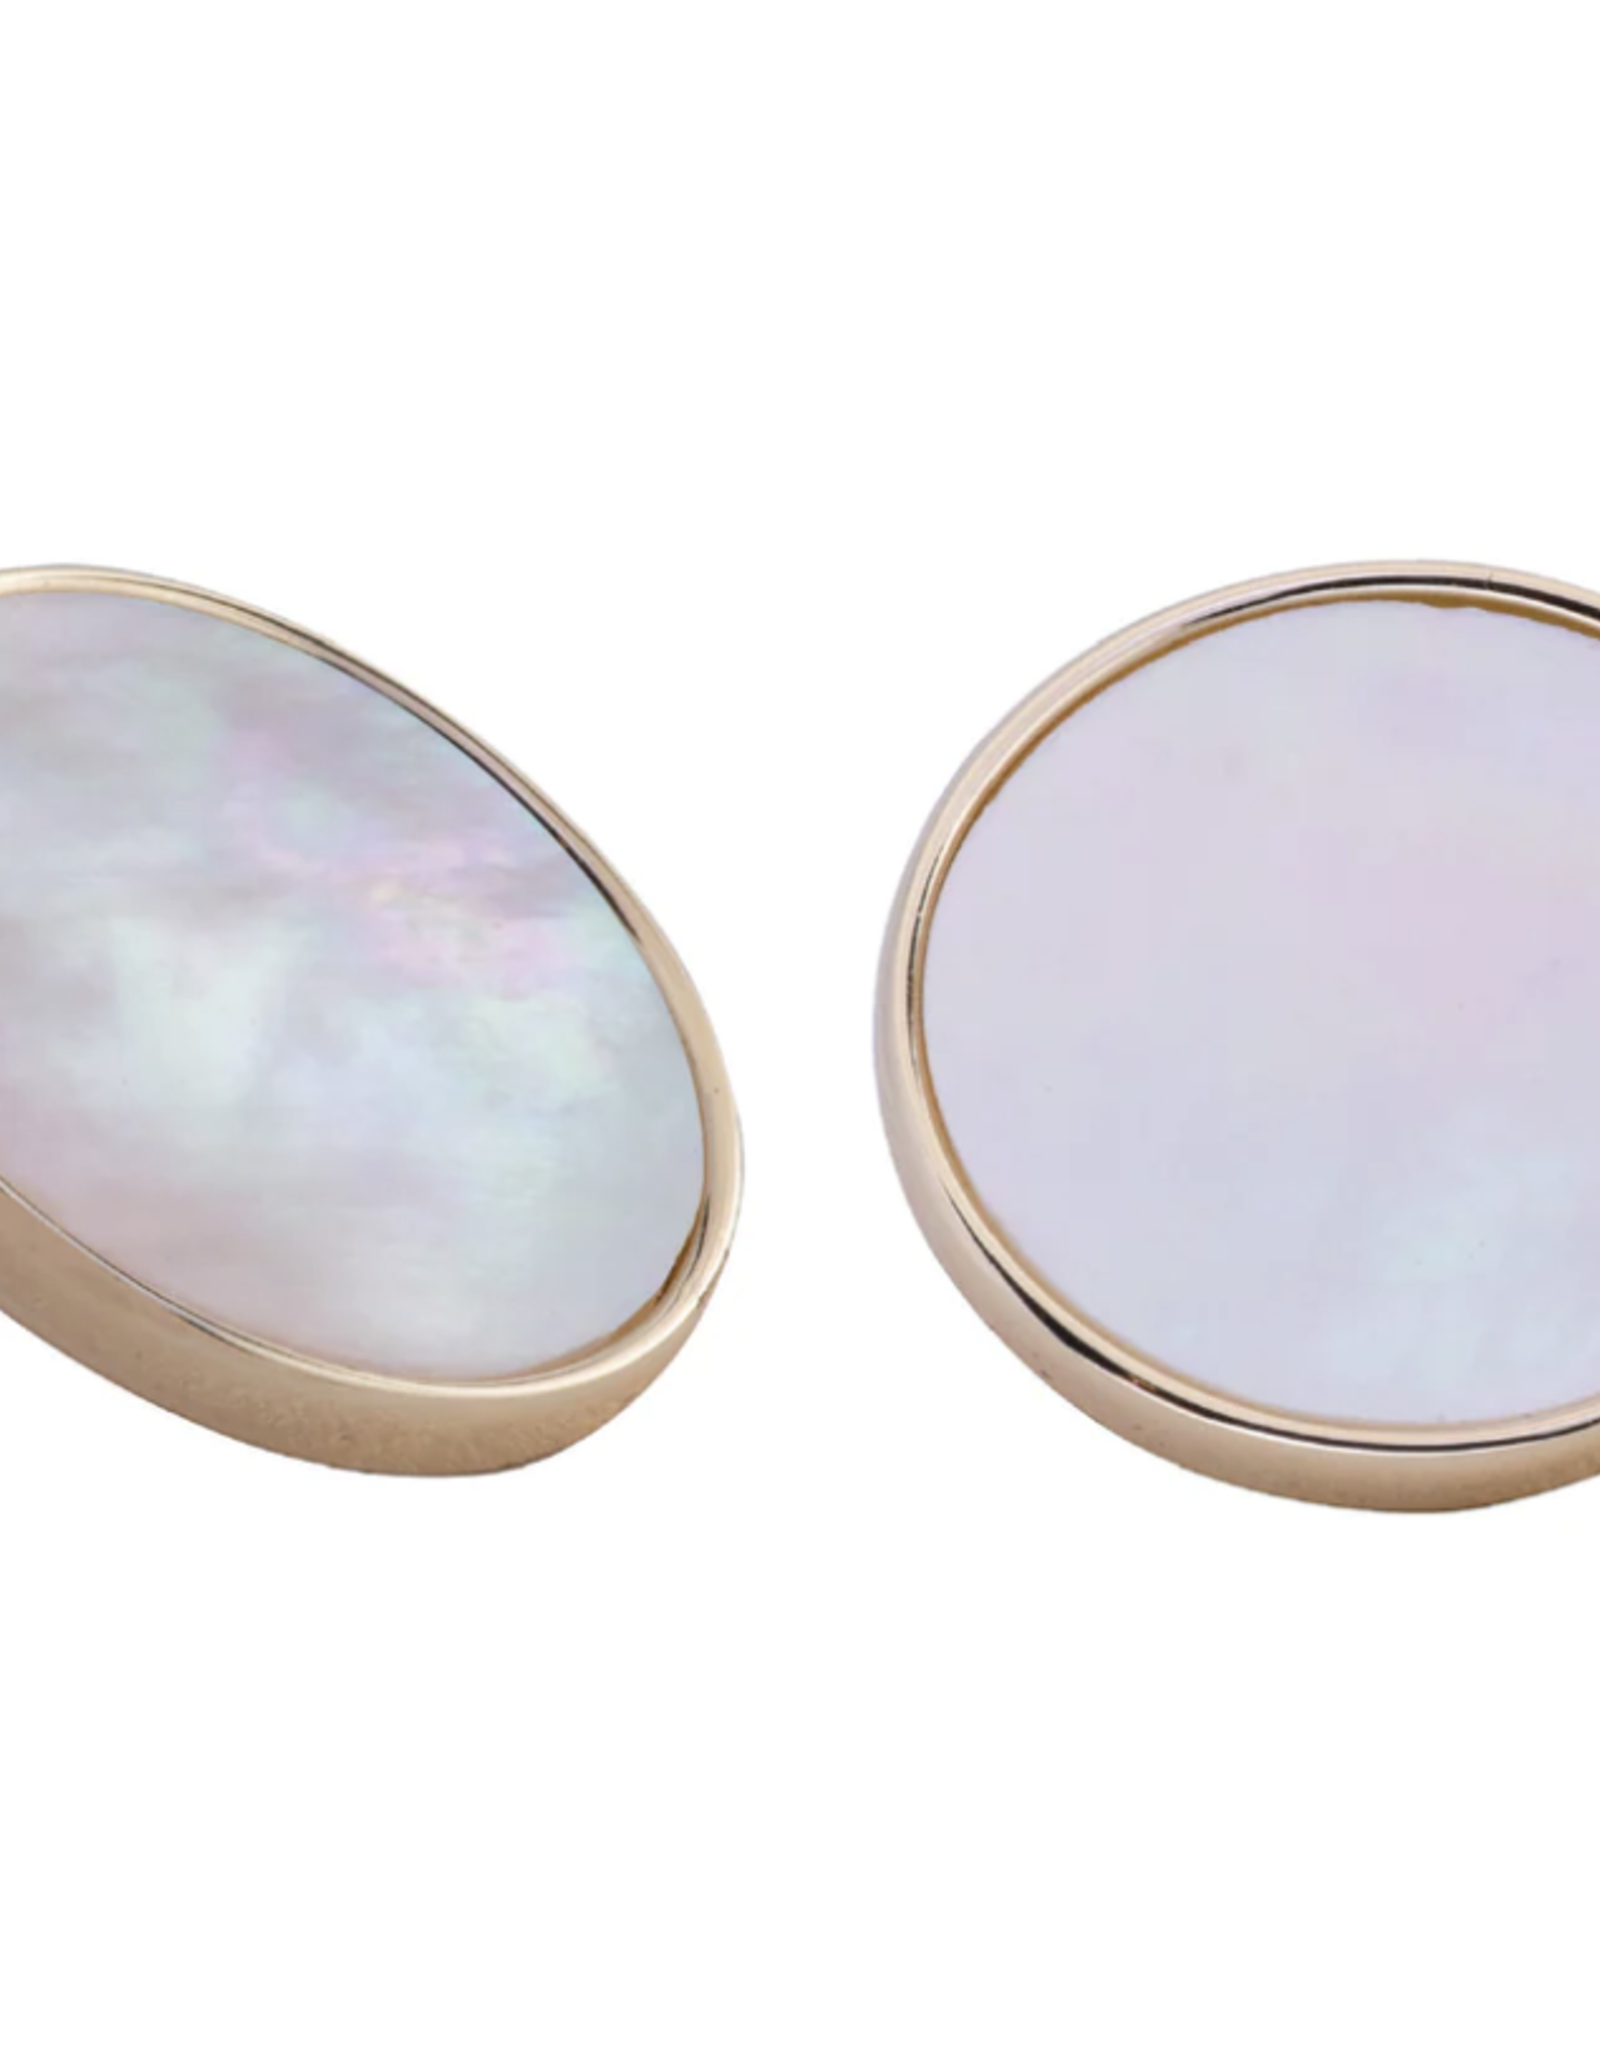 The Beach and Back Dana Point Circle Mother of Pearl Post Earrings